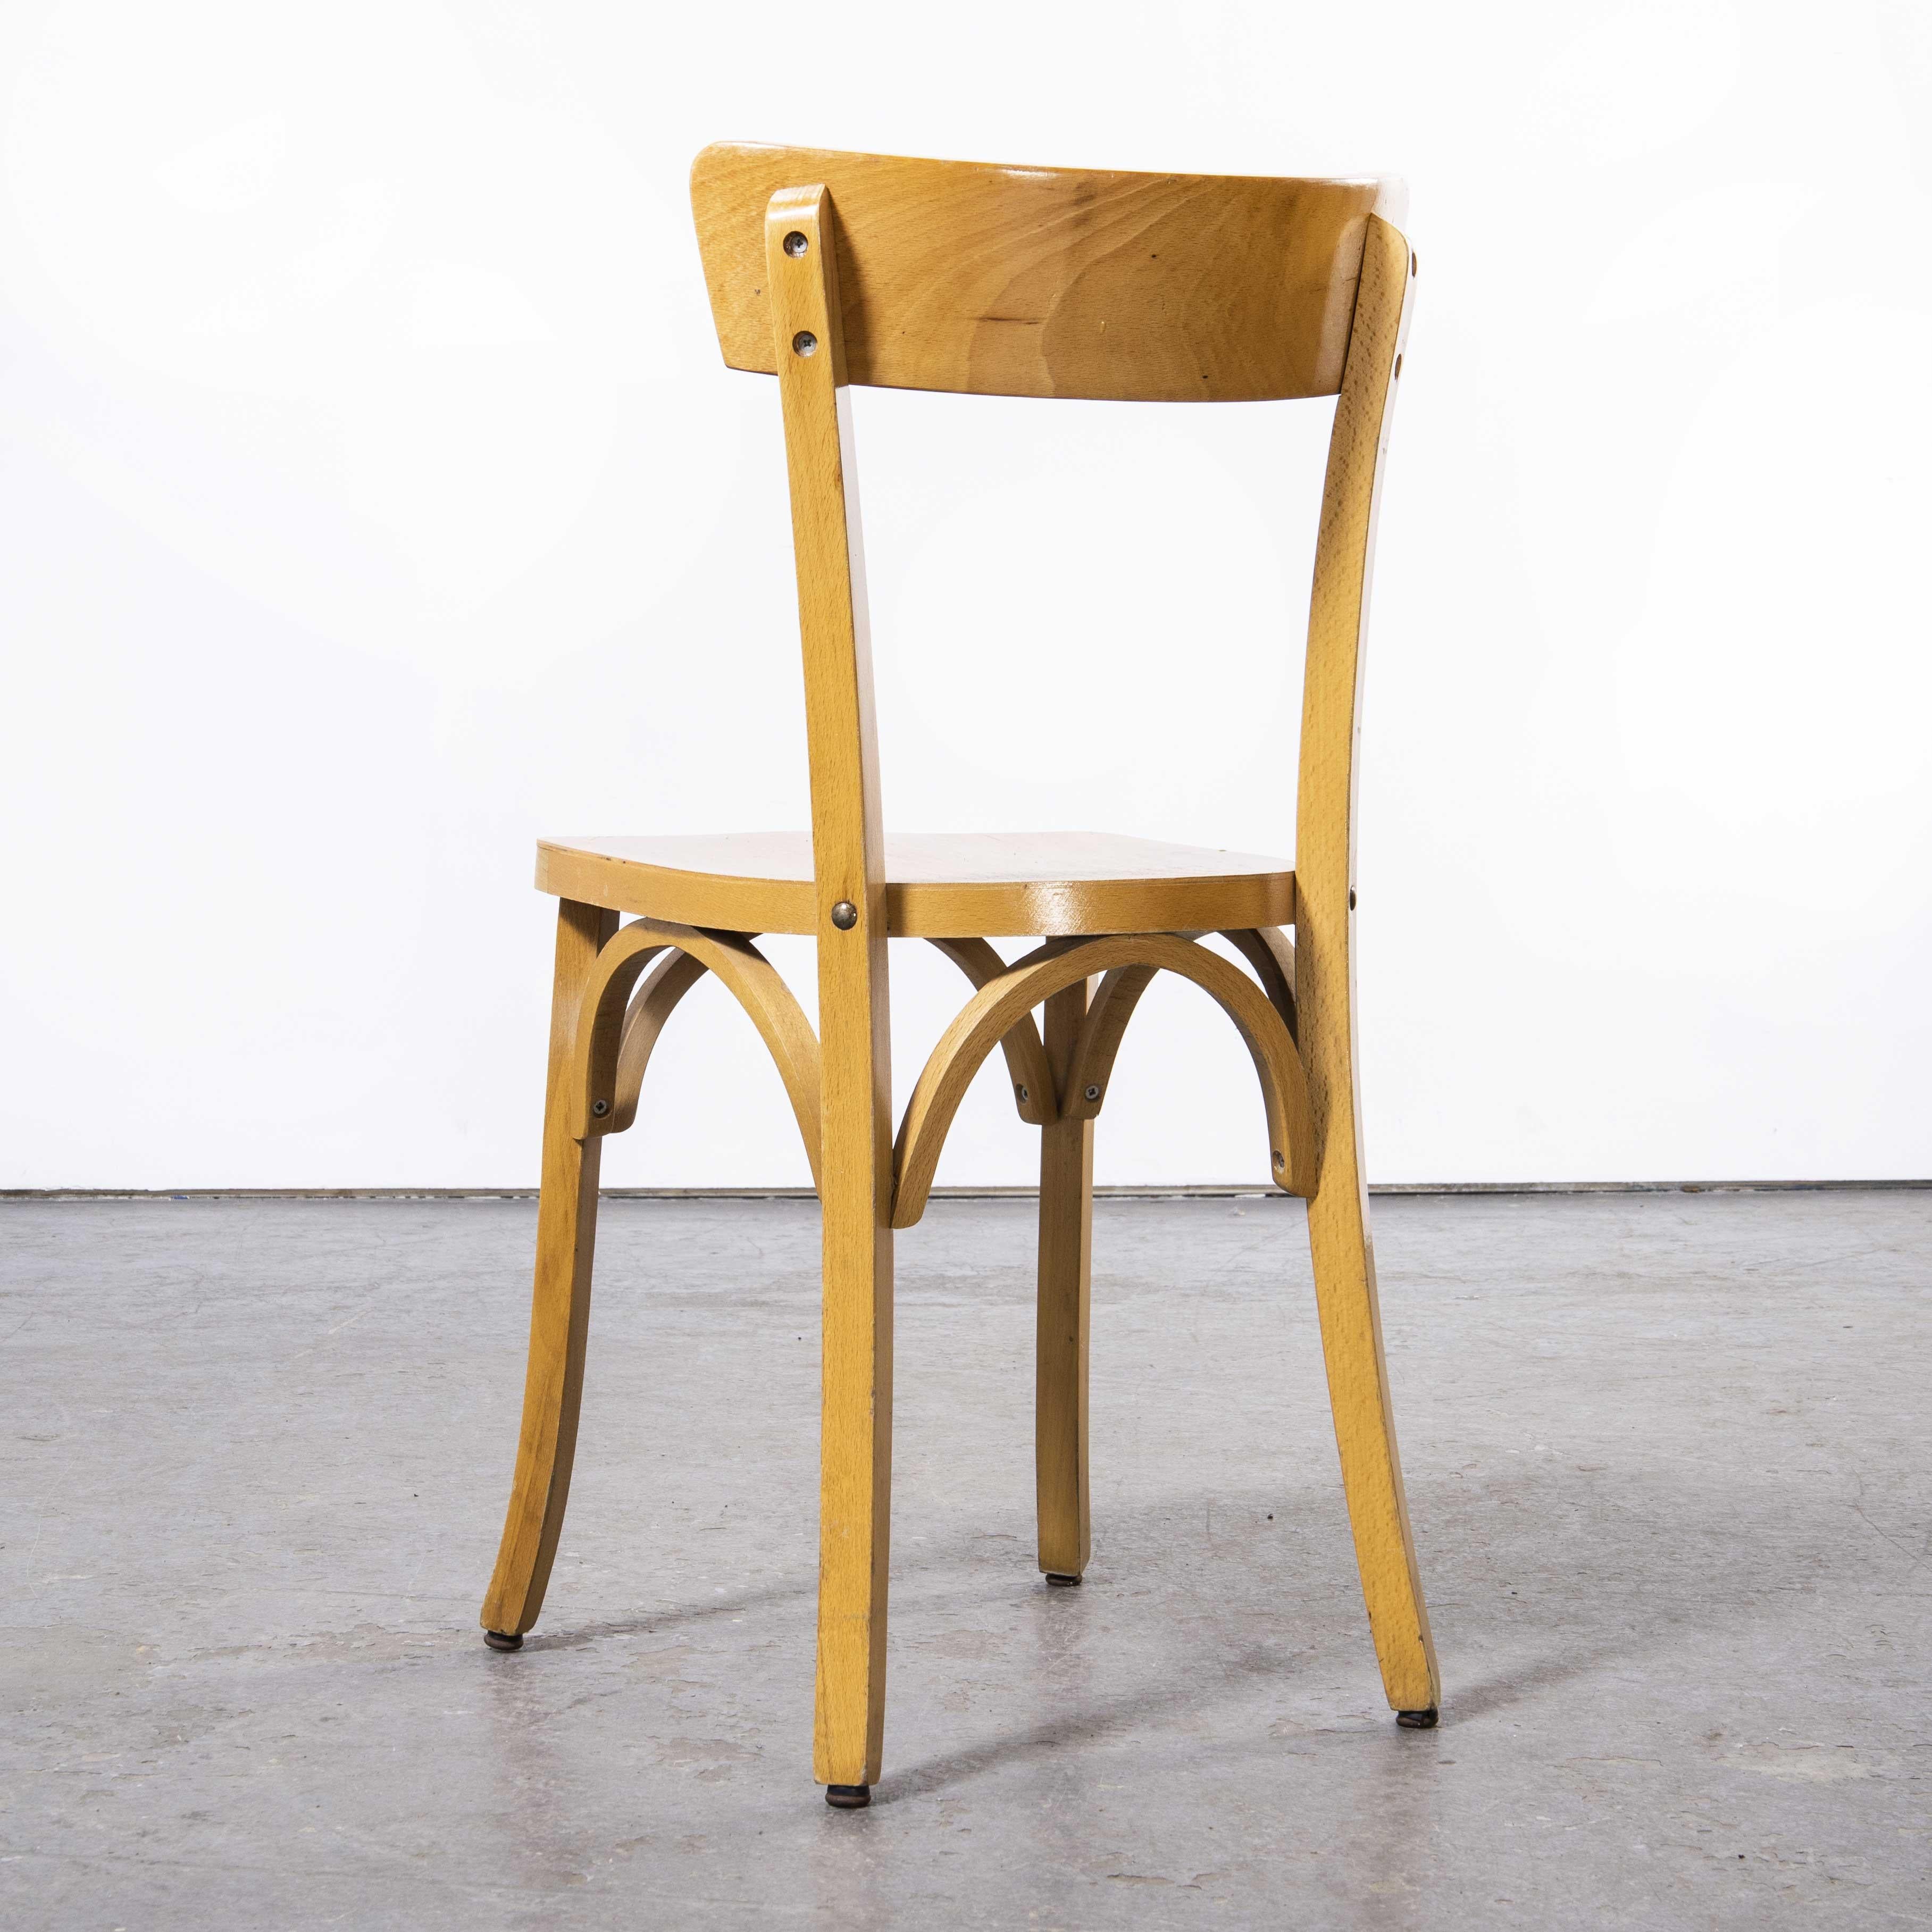 1950’s French Baumann blonde beech bentwood dining chairs – set of ten (Model 1402)

1950’s French Baumann blonde beech bentwood dining chairs – set of ten (Model 1401). Baumann is a slightly off the radar French producer just starting to gain